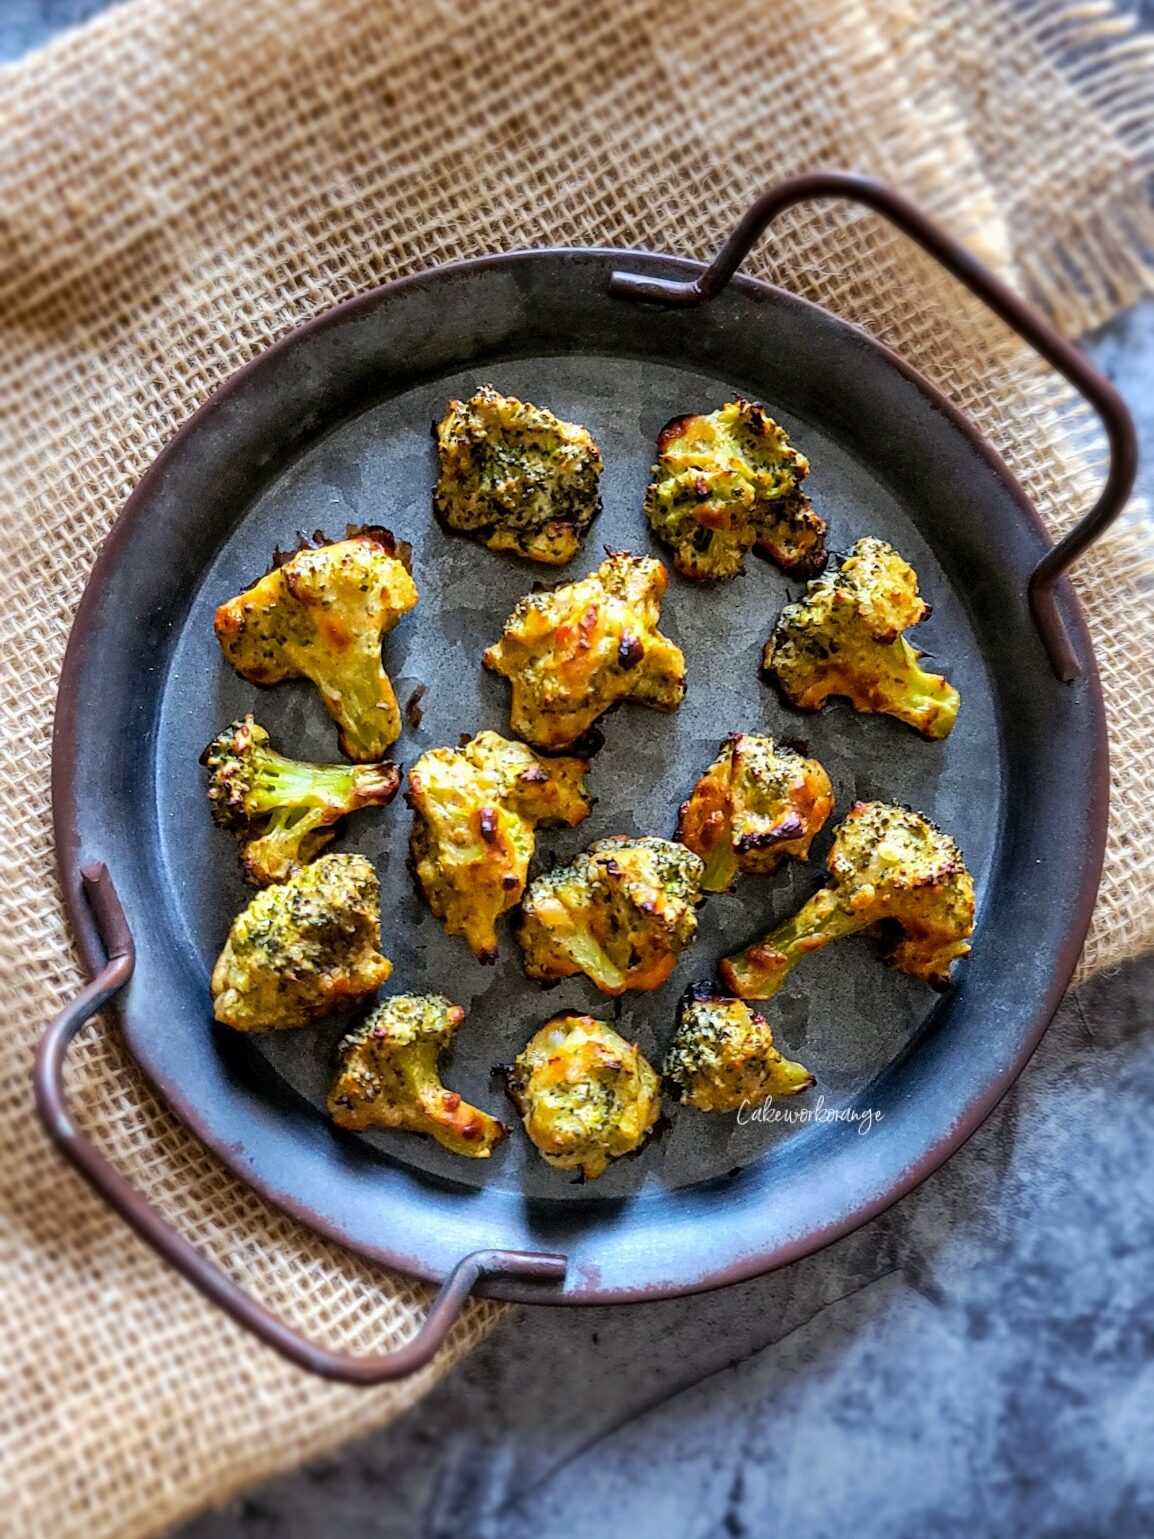 Malai Broccoli cooked in the oven